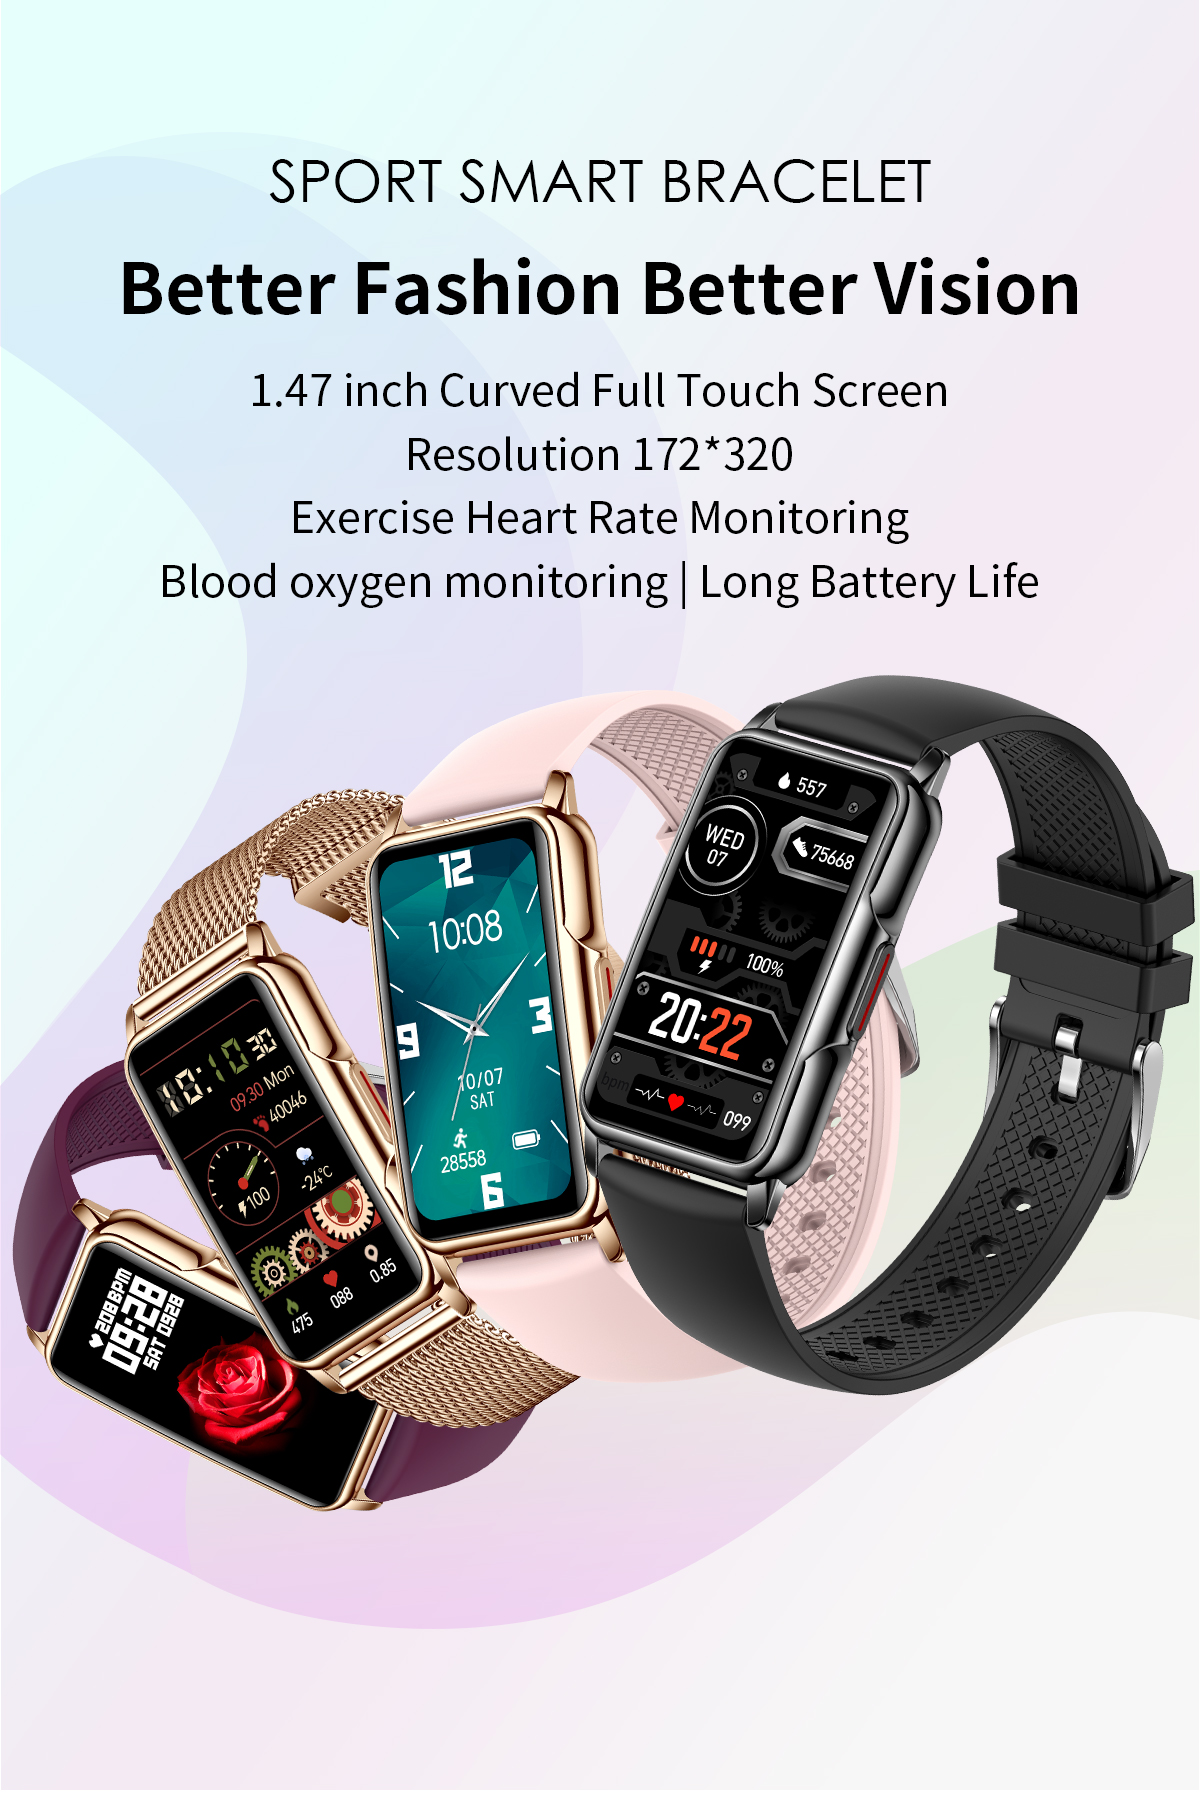 H80 Female Smart Watch | Sport Smart Bracelet | 1.47 Inch Curved Full Touch Screen | Exercise Heart Monitoring | Blood Oxygen Monitoring 2